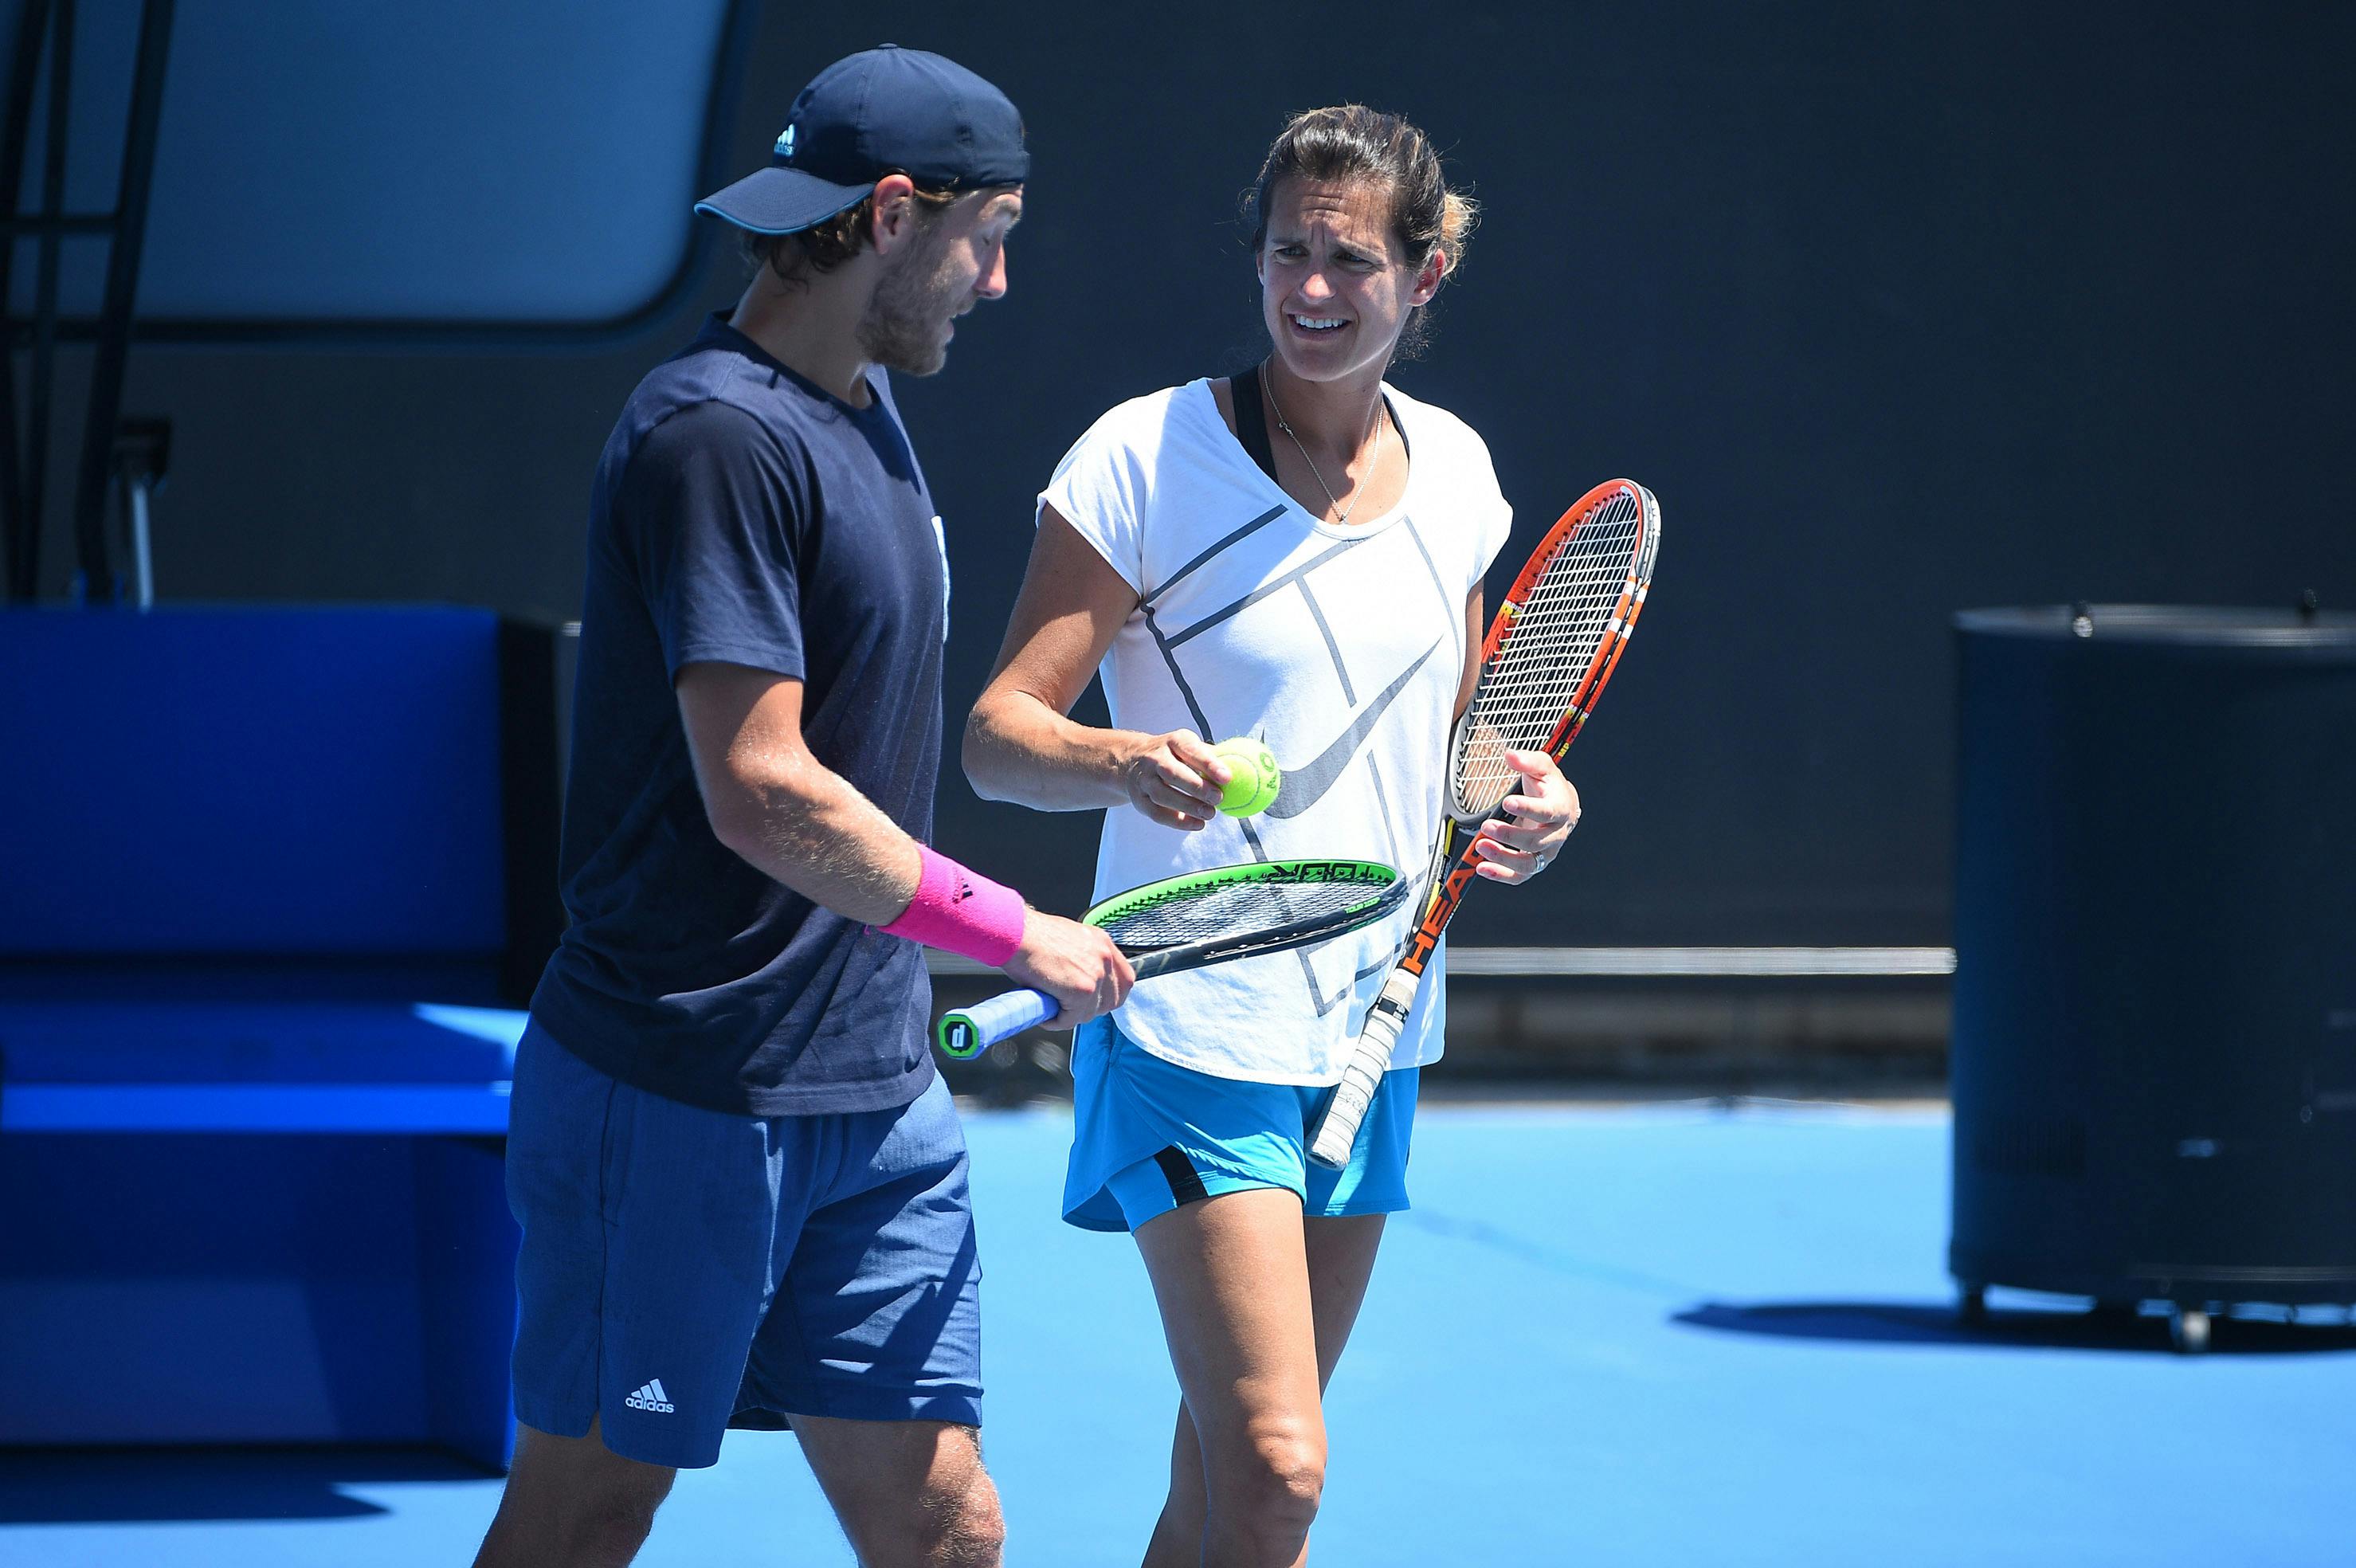 Amelie Mauresmo and Lucas Pouille talking during practice at the 2019 Australian Open